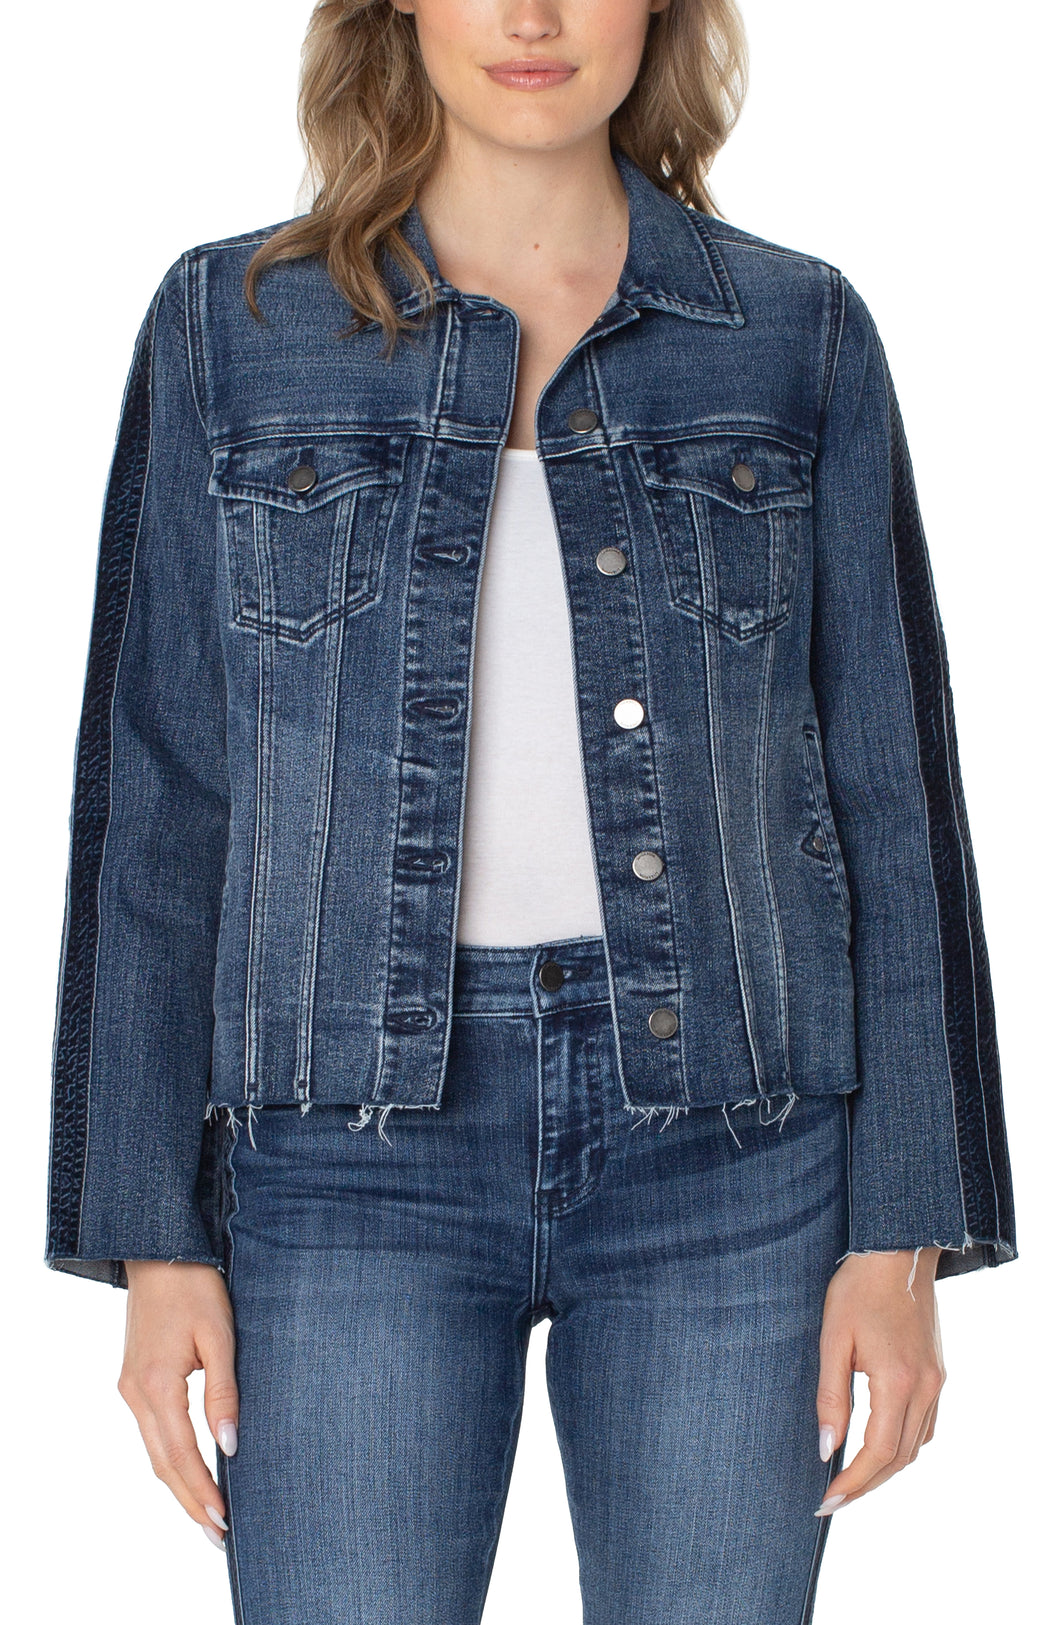 The timeless jean jacket gets a modern edge with a frayed hem and velvet trim adorning the silhouette. Its versatility makes it ideal for a range of occasions and it can easily be elevated when paired with the coordinating Hannah Crop Flare.  Color- Gilmore; dark blue with fading. Button front closure. Velvet trim down arms. Elevated frayed hem details. Flap patch pockets.